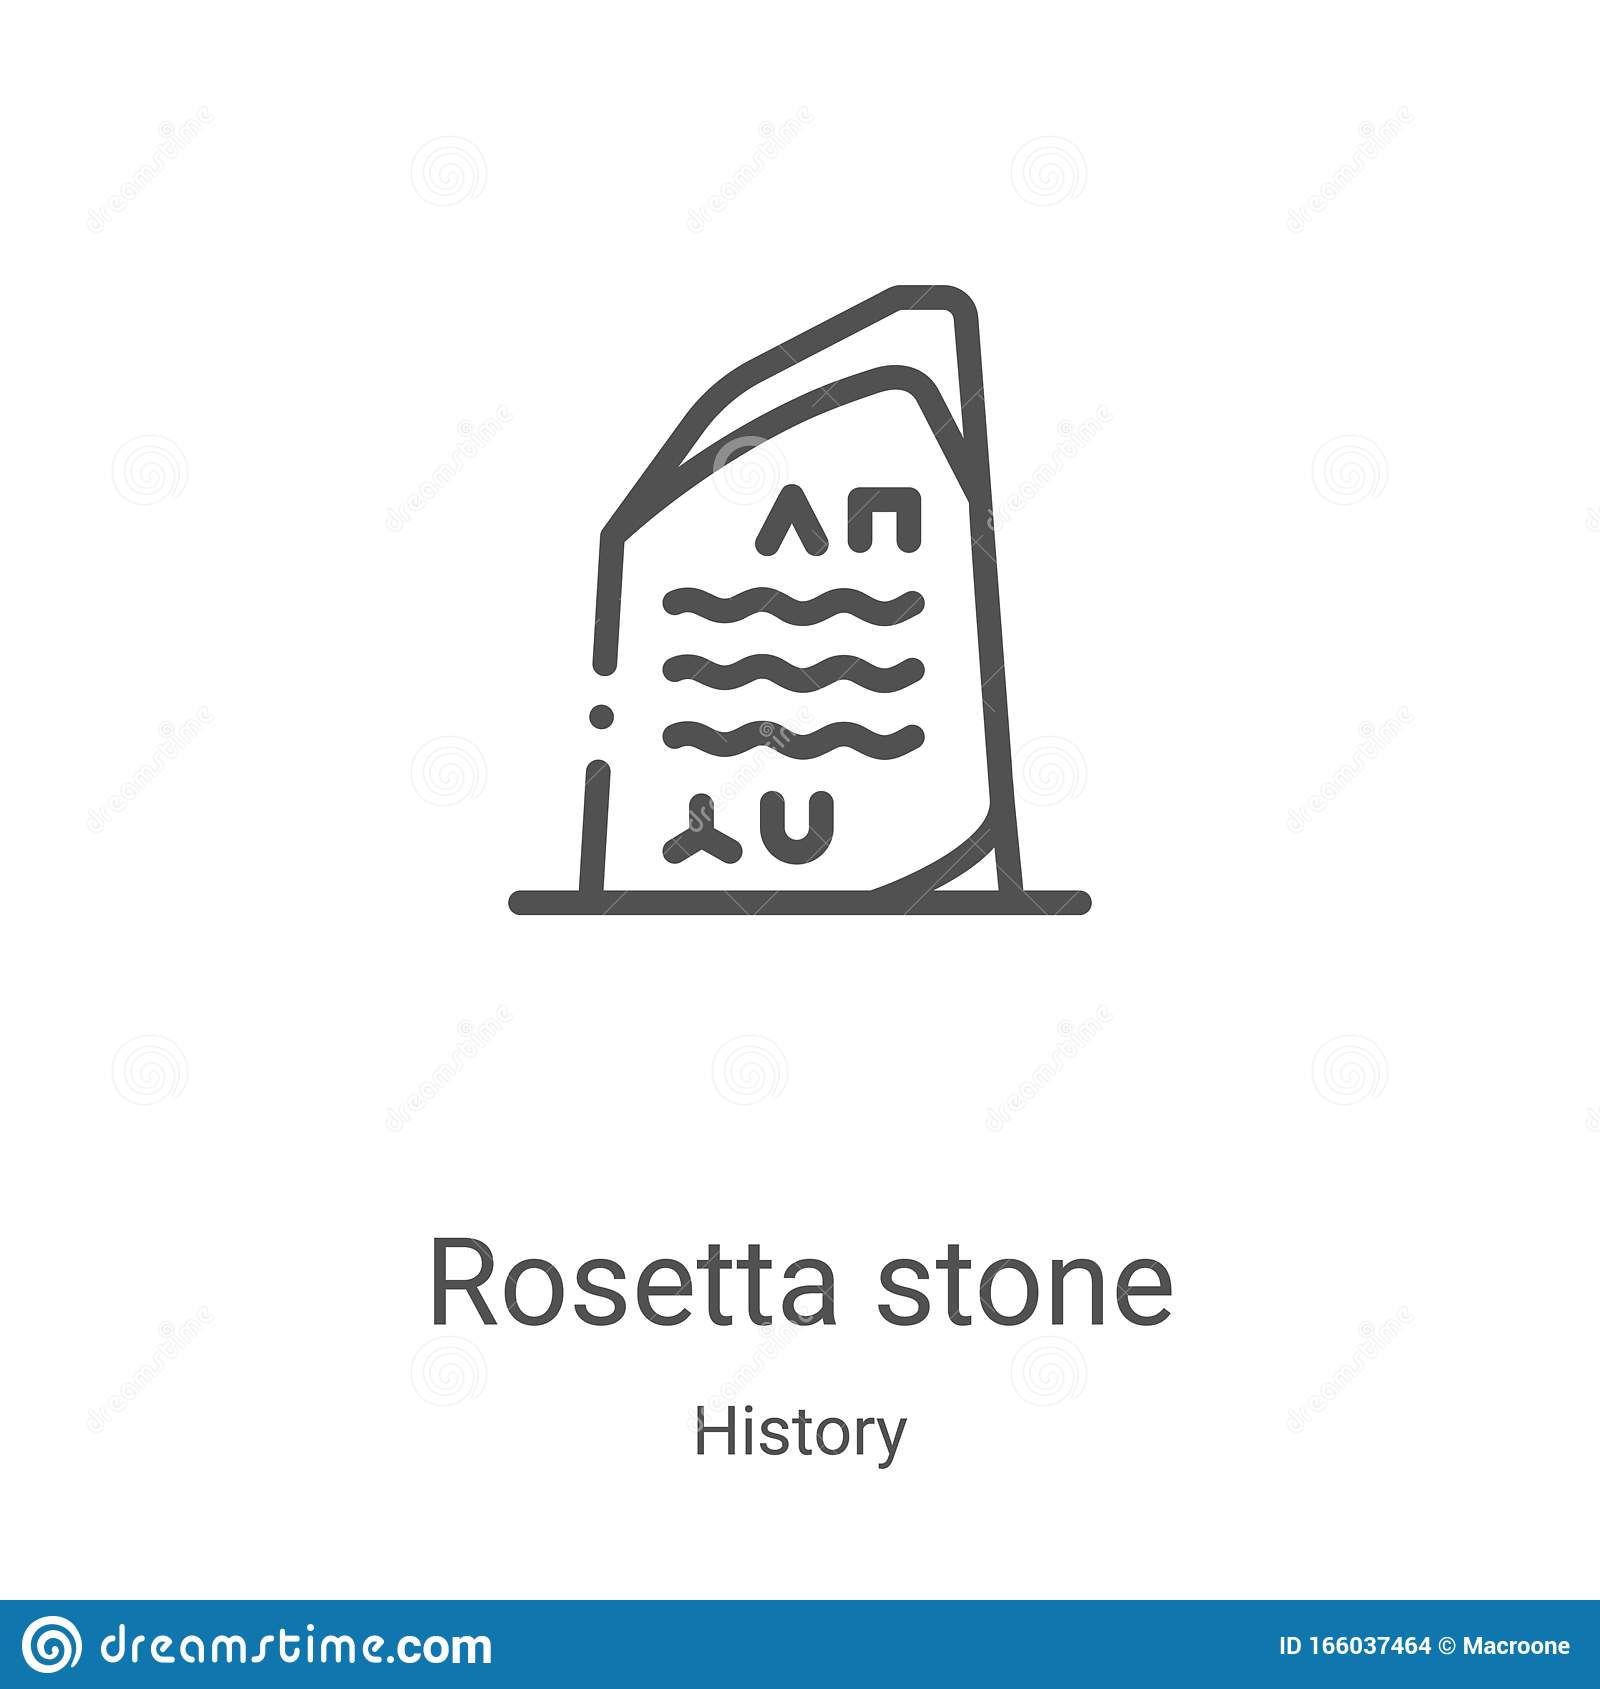 Rosetta Stone 8.19.0 Crack with activation code {2022}